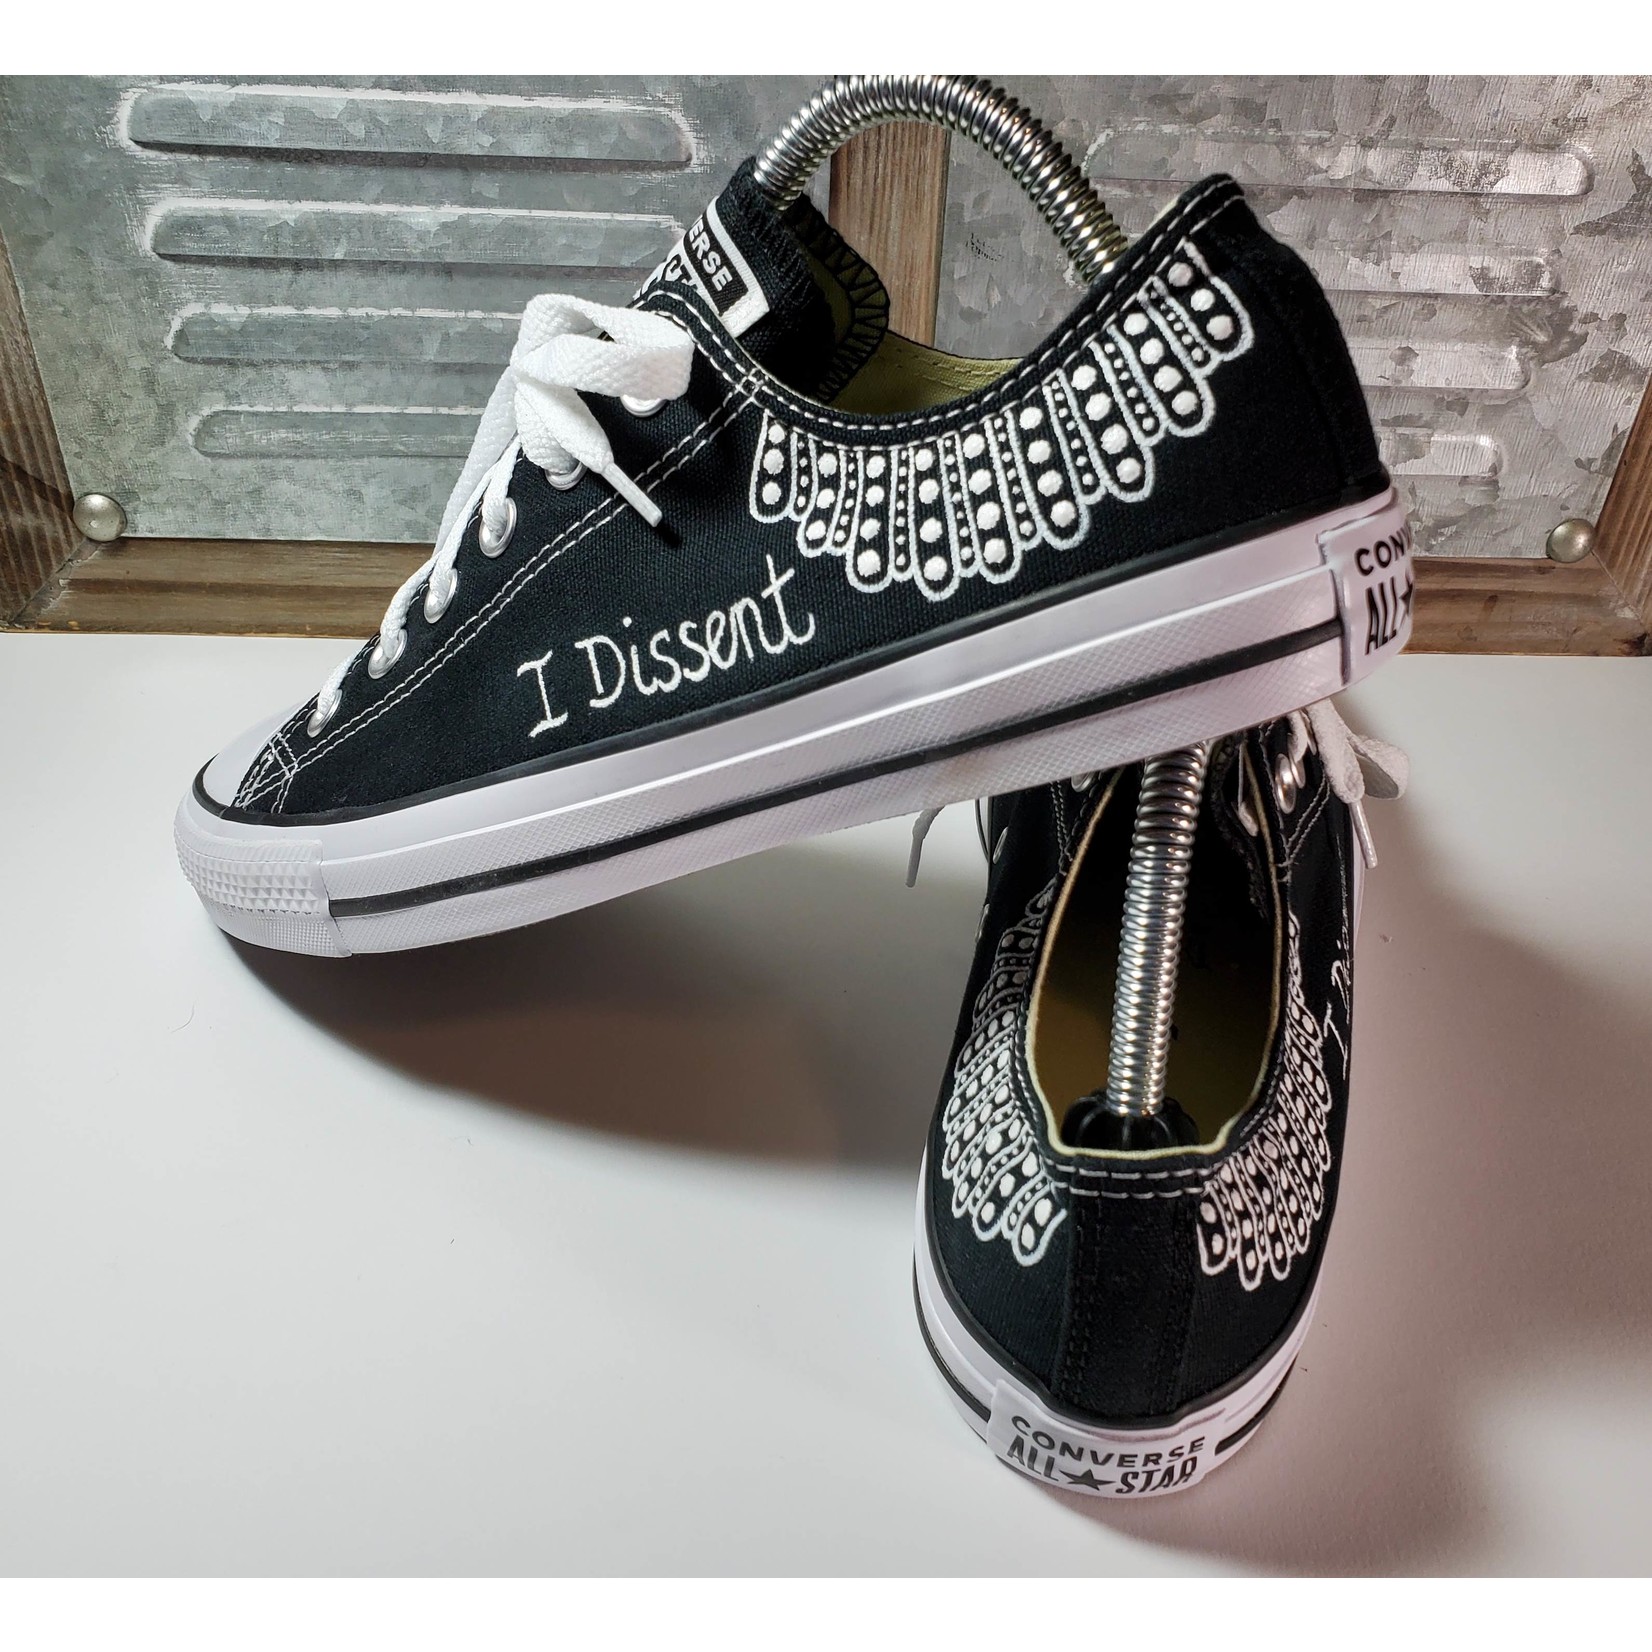 Stirling Studios Ruth Bader Ginsberg Custom Converse  -  Double Sided w/ Text "I Dissent"